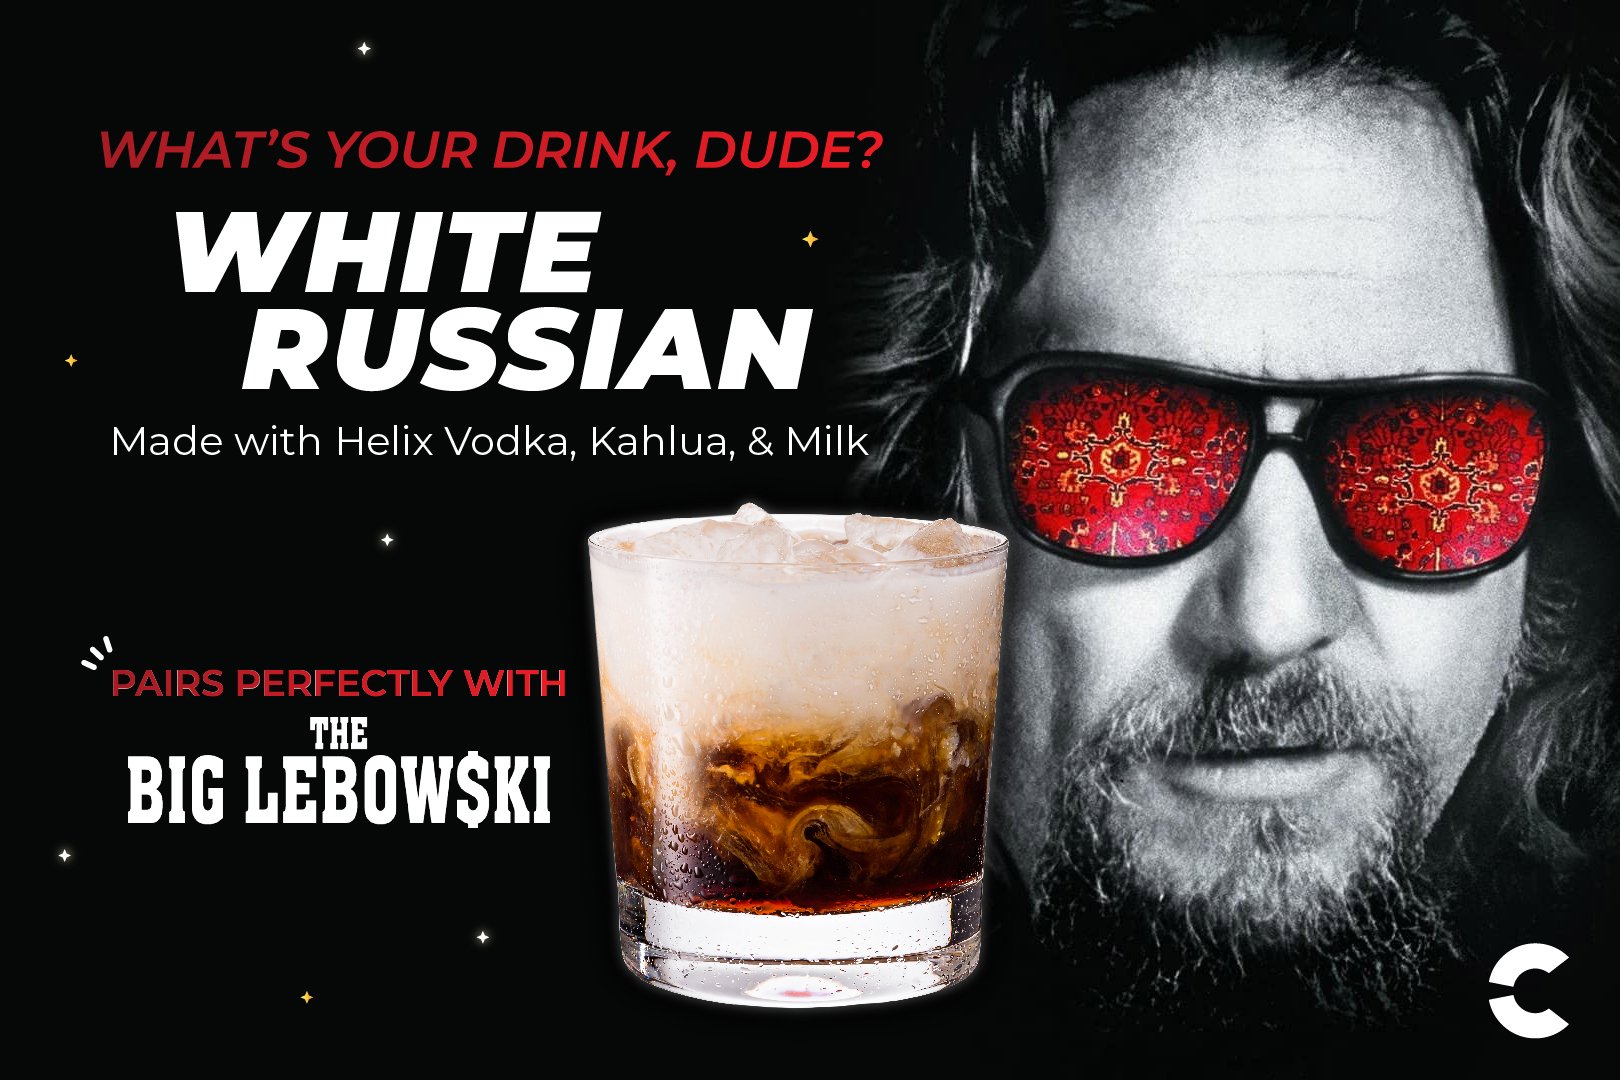 Order a White Russian while watching The Big Lebowski at Cinepolis